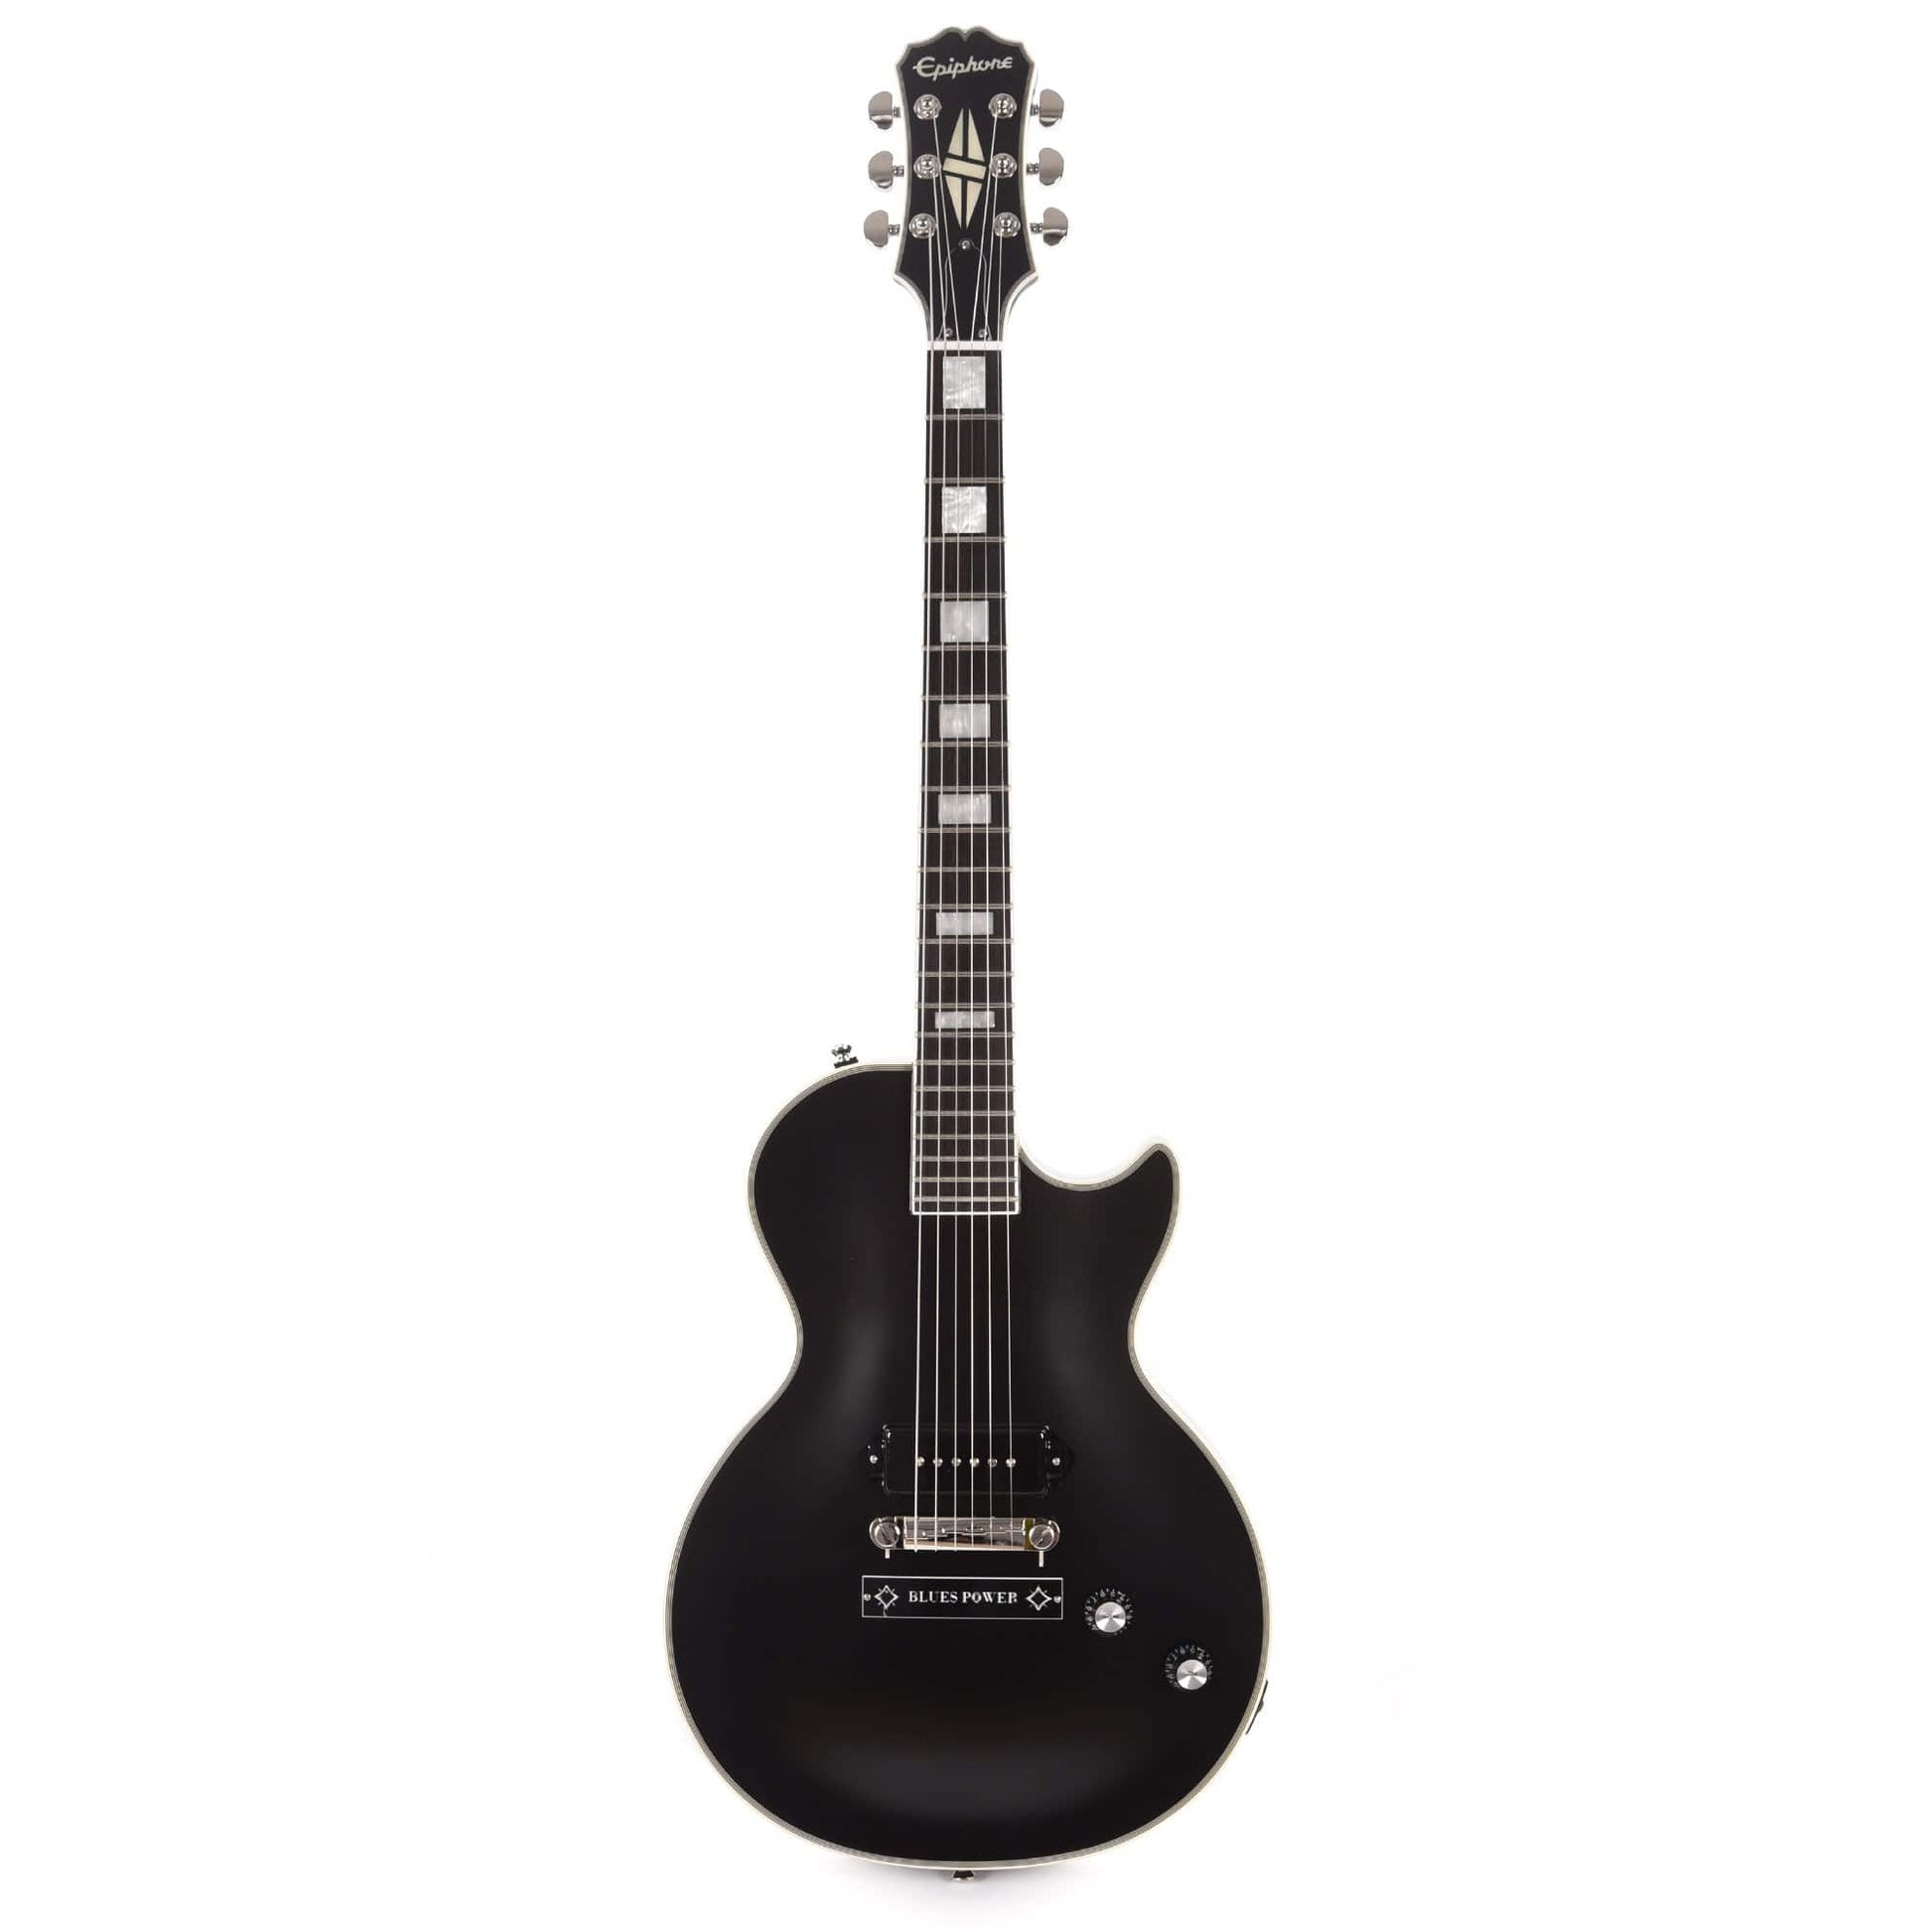 Epiphone Jared James Nichols "Old Glory" Les Paul Custom Outfit Electric Guitars / Solid Body